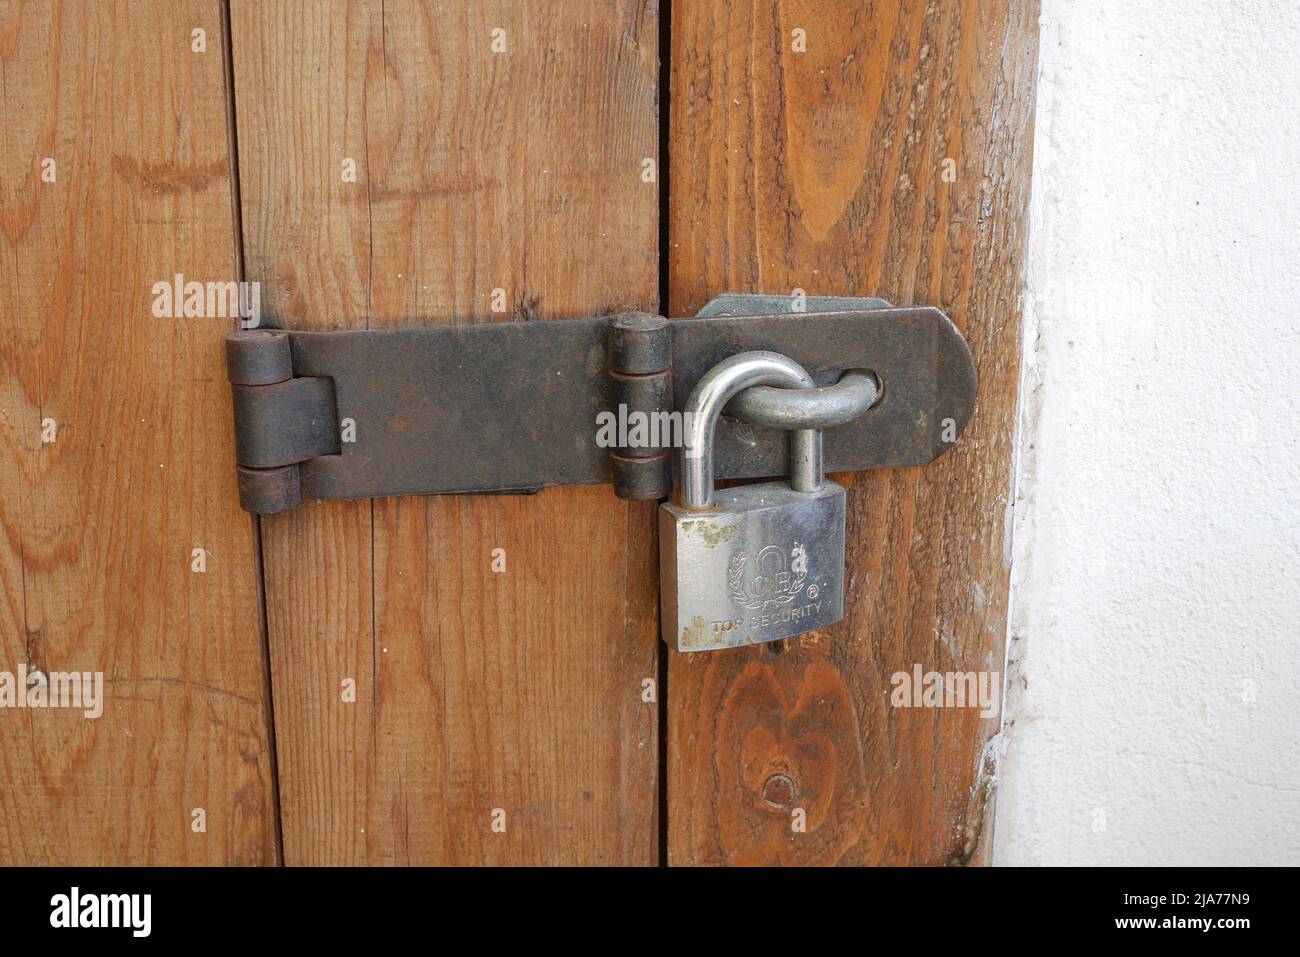 Padlock and hasp on a wooden shed door, Hungary Stock Photo